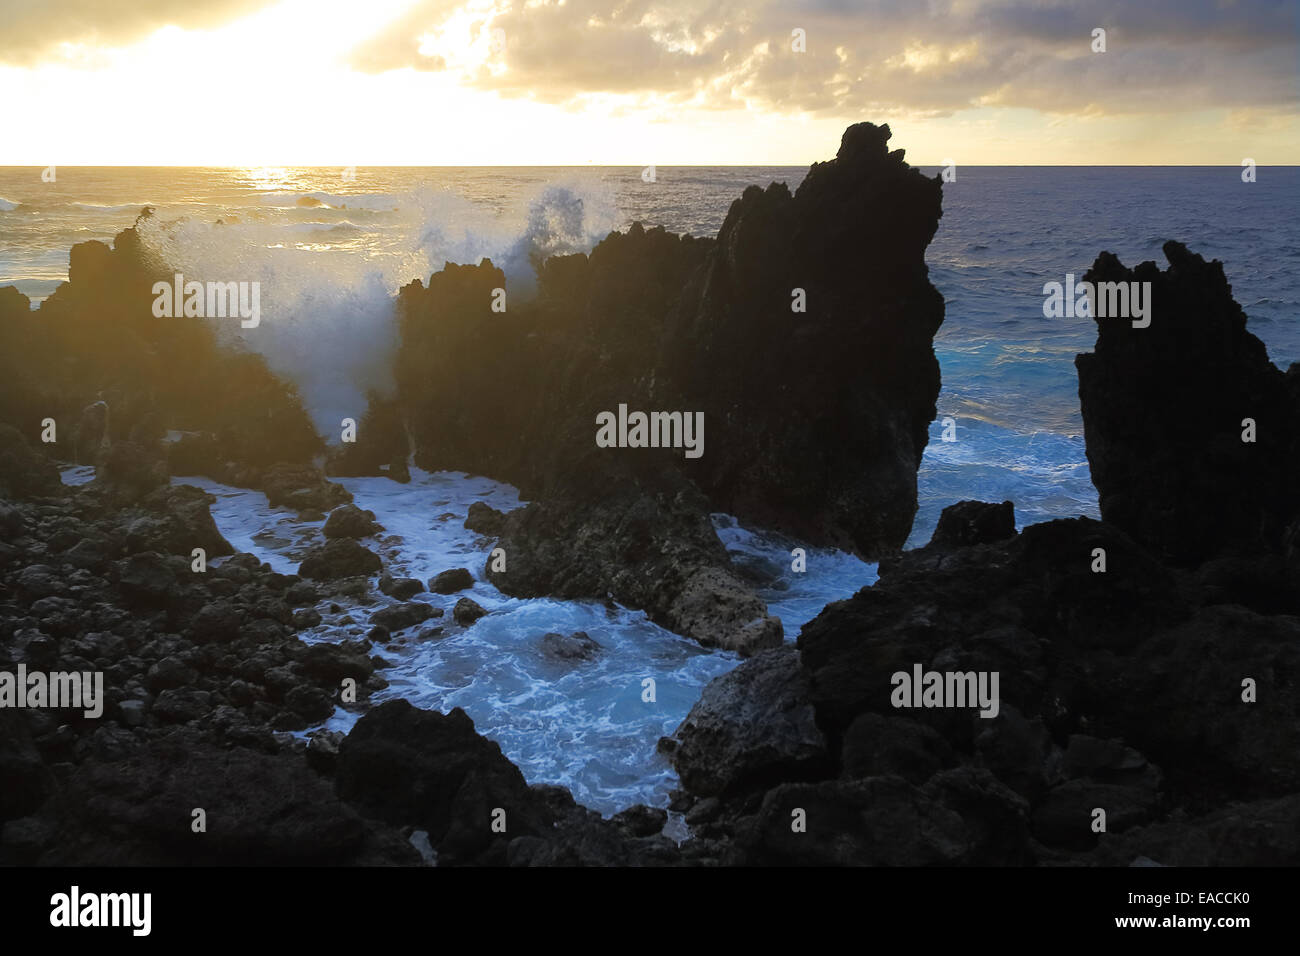 Ocean waves crash on the lava rocky coast at Laupāhoehoe Point on the big island of Hawaii Stock Photo